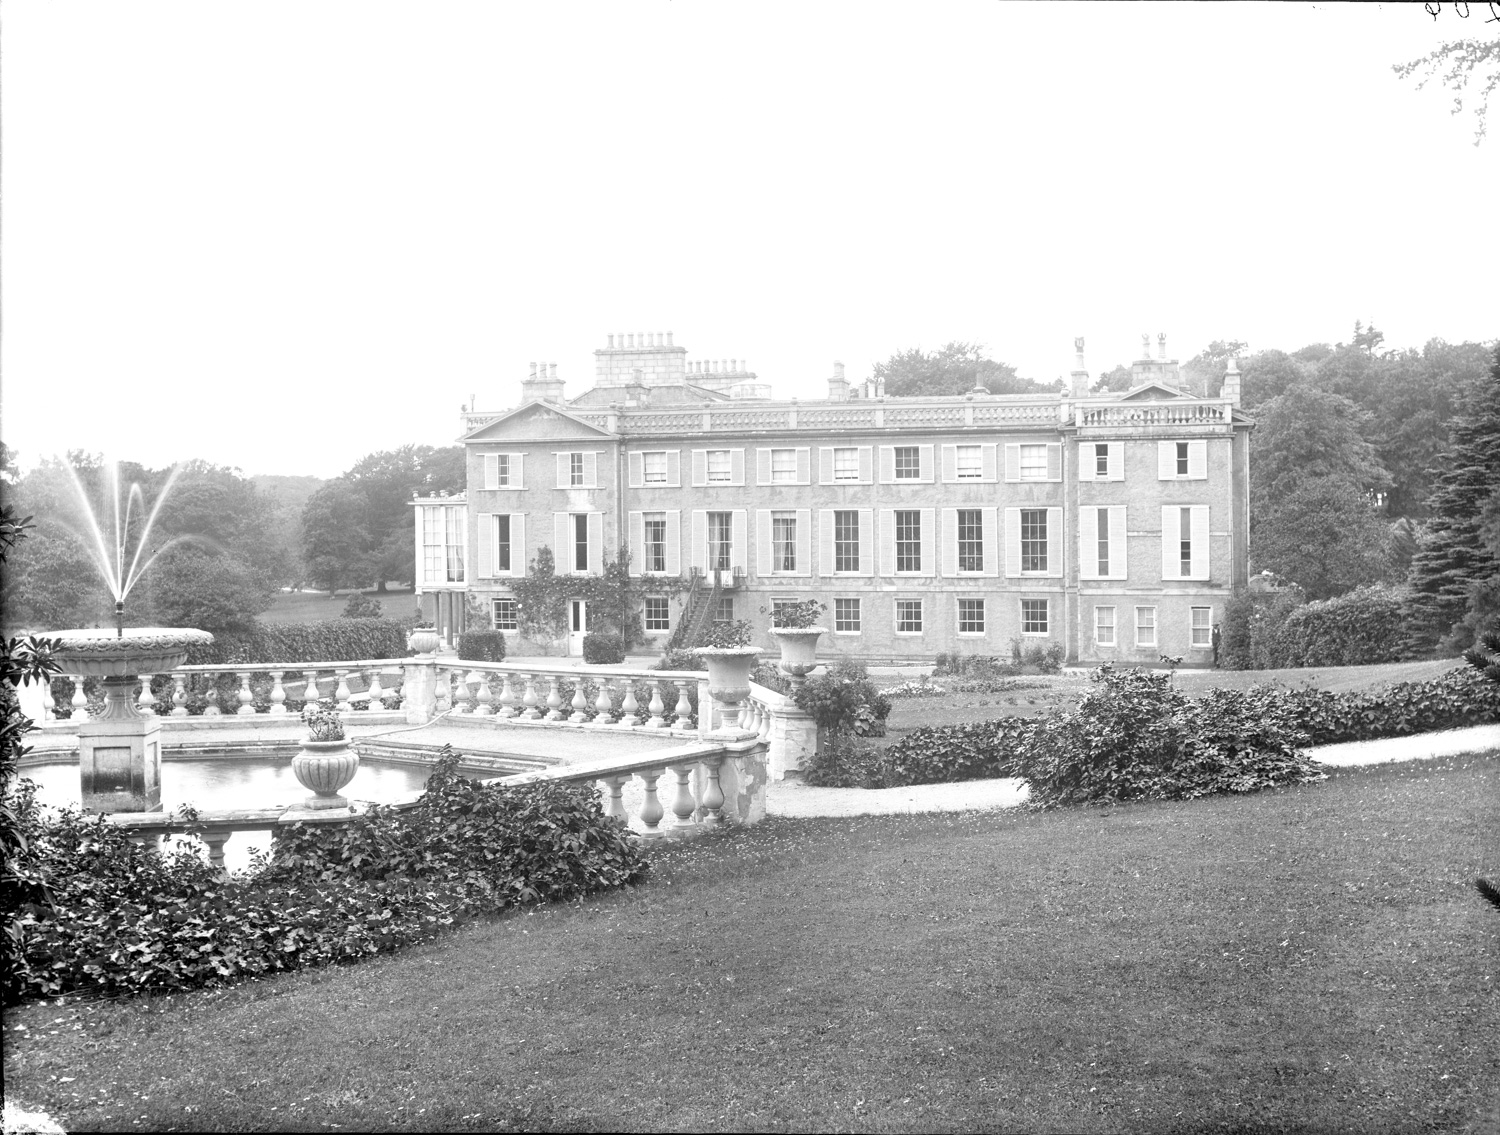 19th century image of Pitfour house.